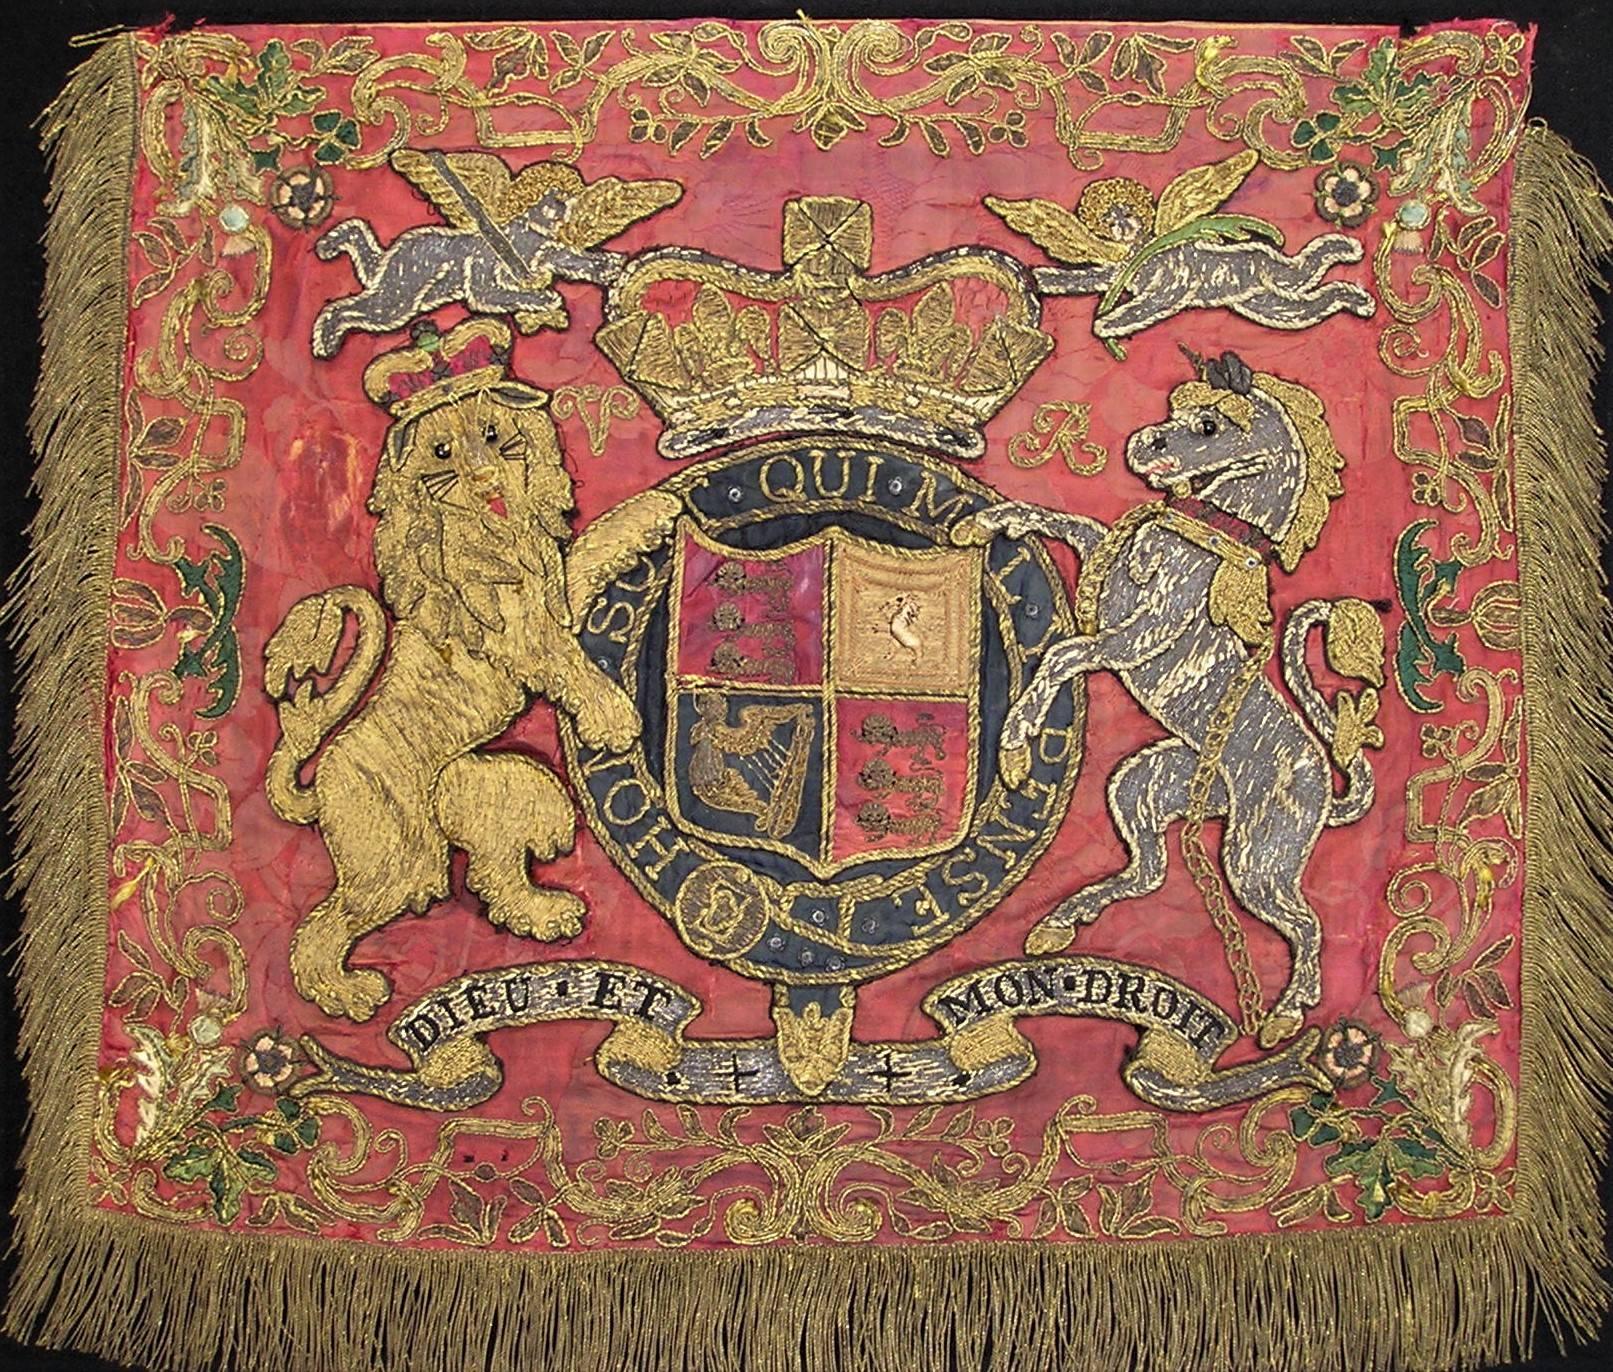 Embroidered Victorian England coat of arms panel, English, circa 1840. Silver and gilt threads on raised work applied to a silk ground. This embroidered panel intended for court use would have been produced by the
professional Broderers’ Guild. The